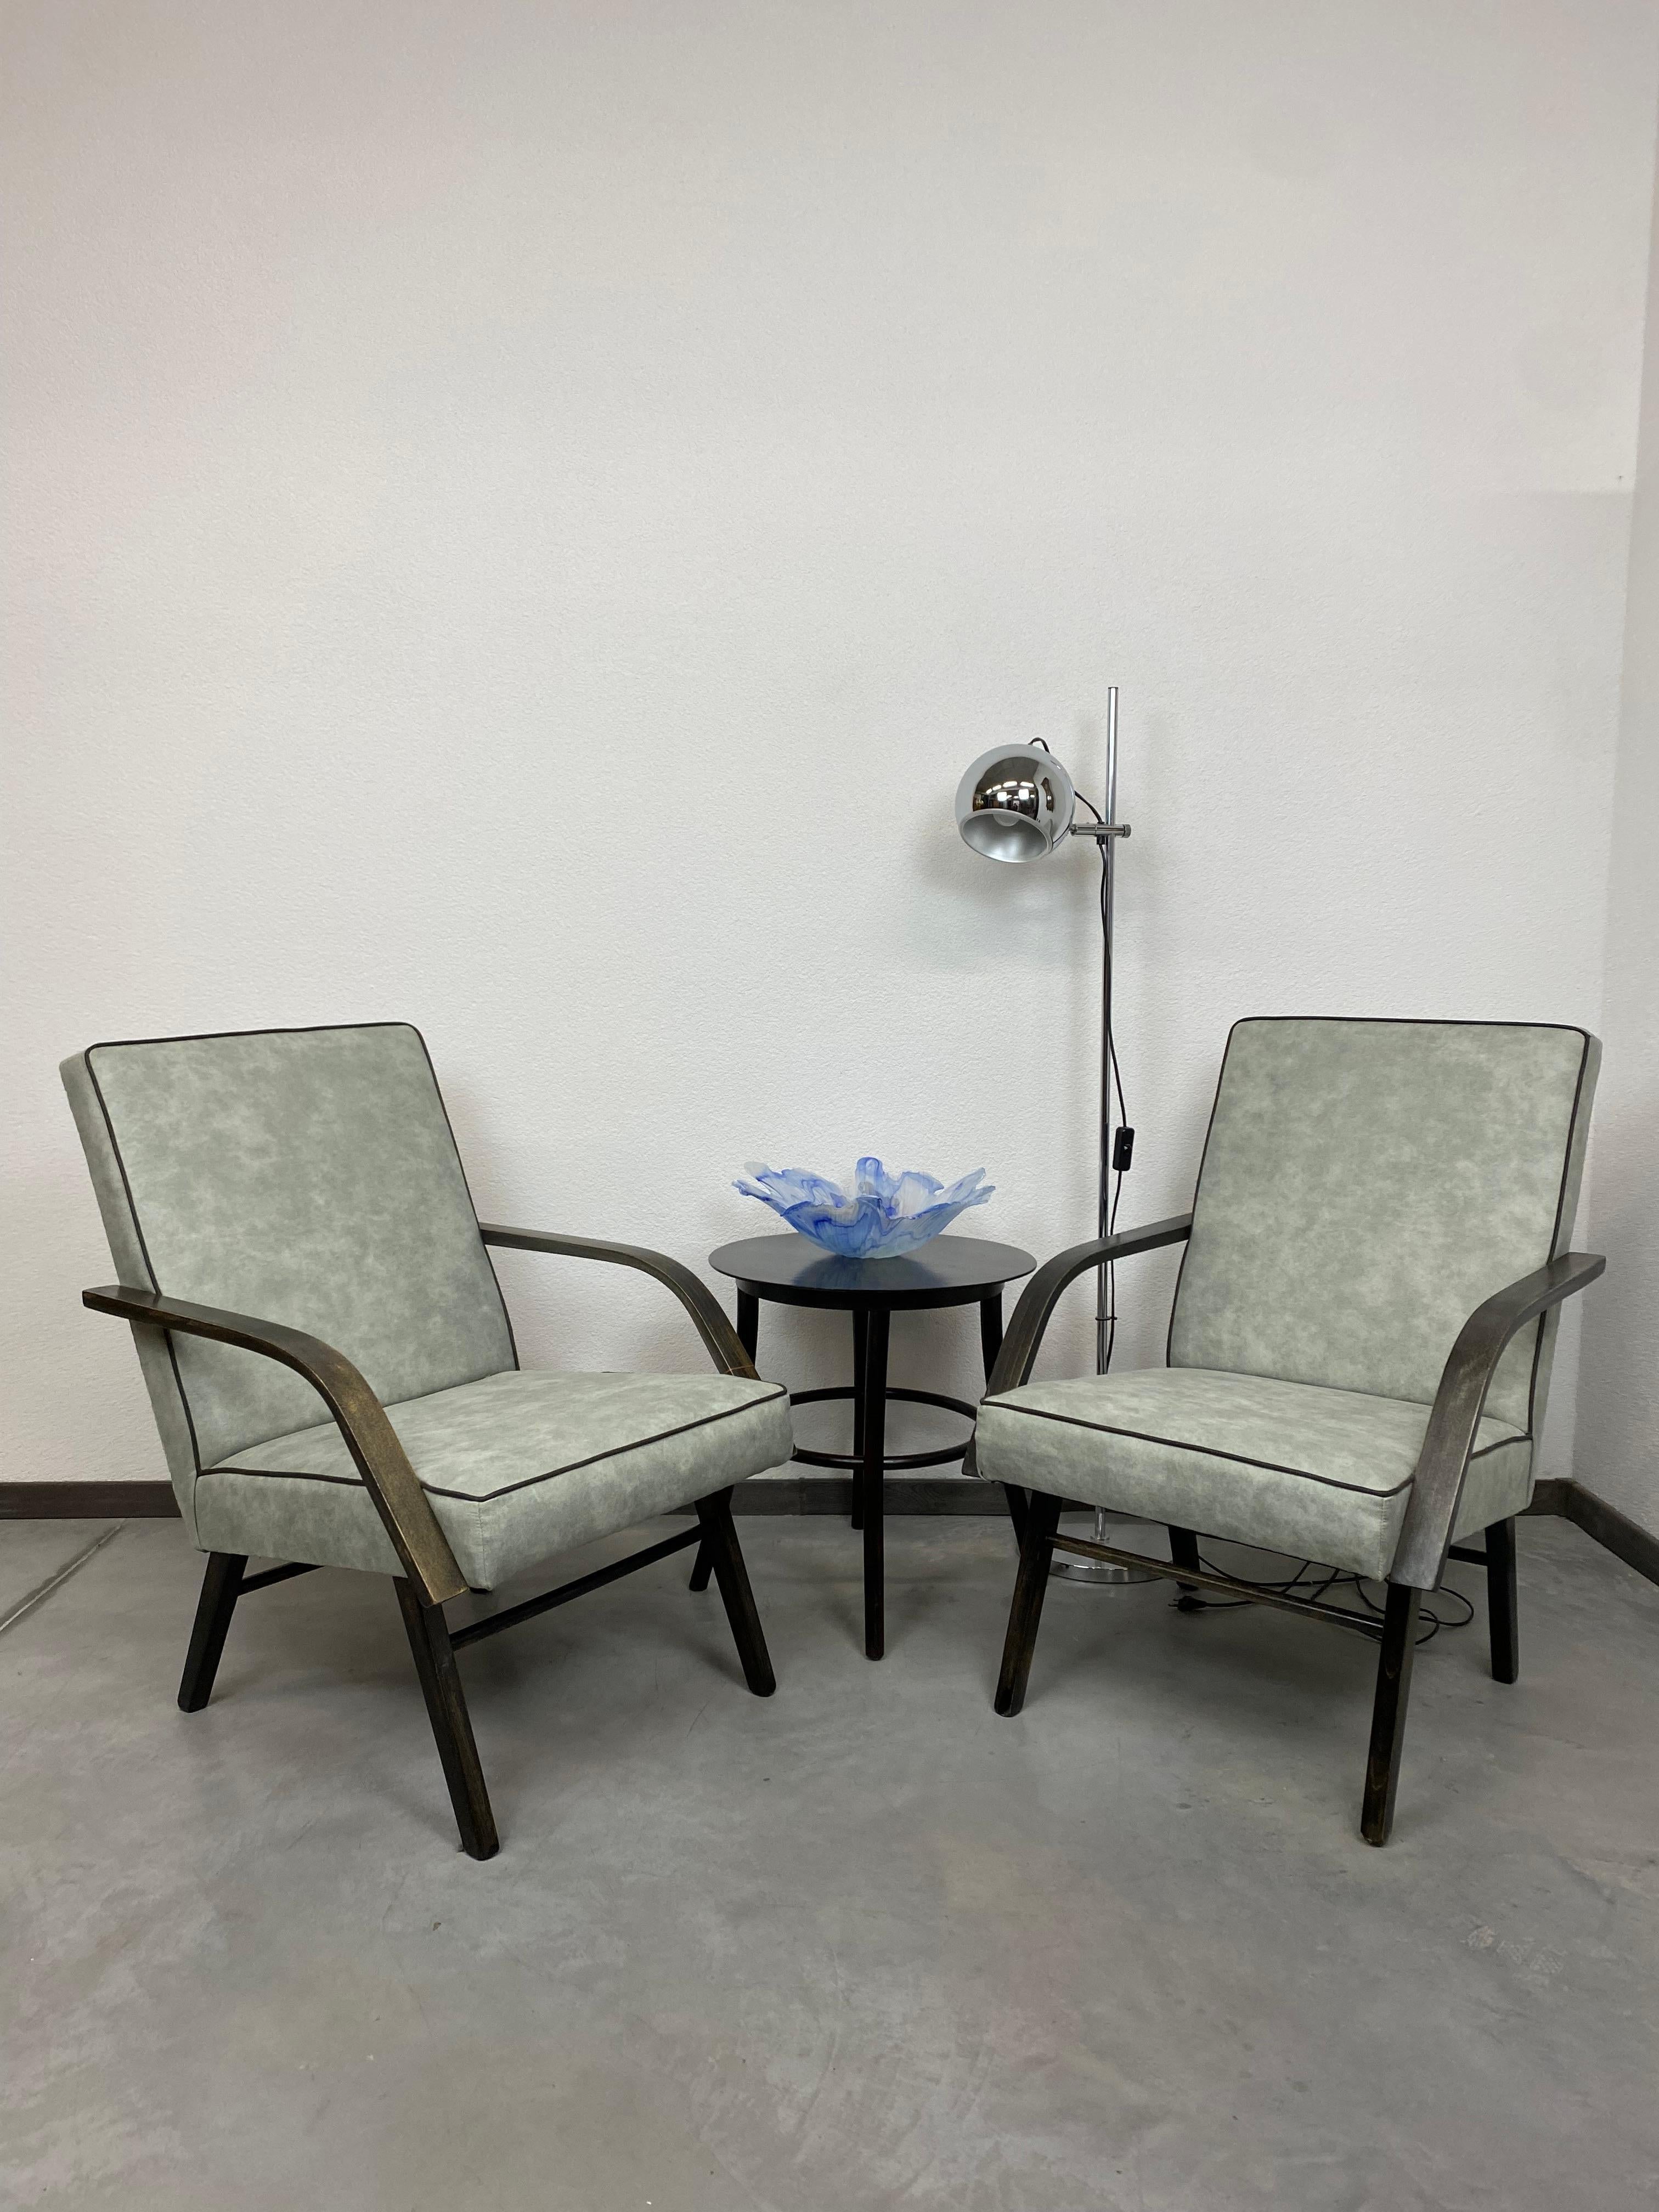 Vintage armchairs after professional renovation.